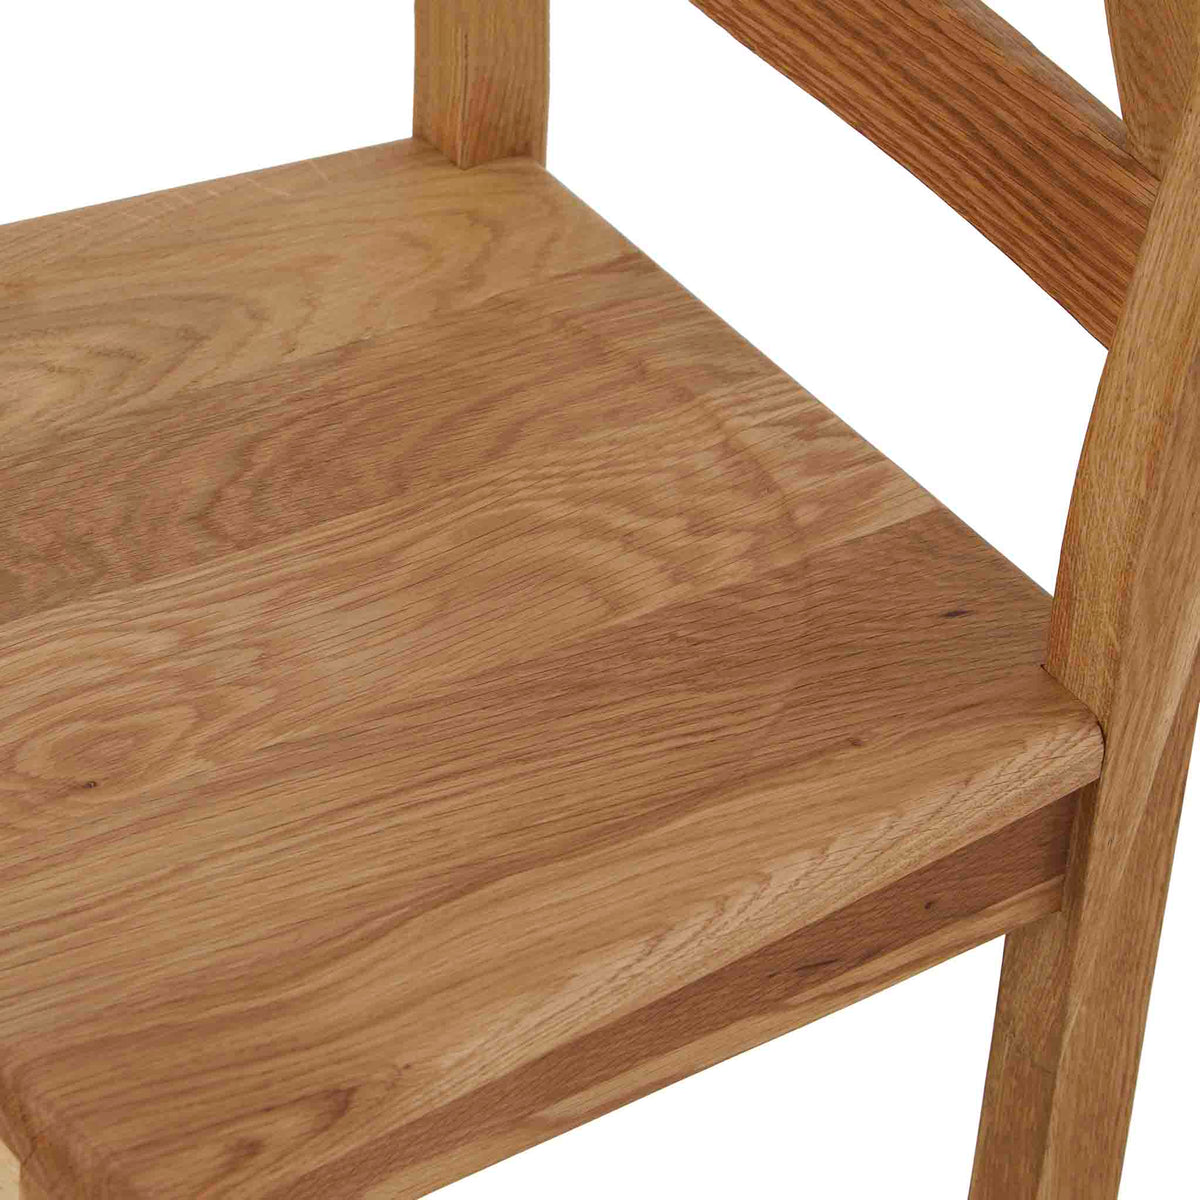 Zelah Oak Crossed-Back Dining Chair - Close up of seat on chair